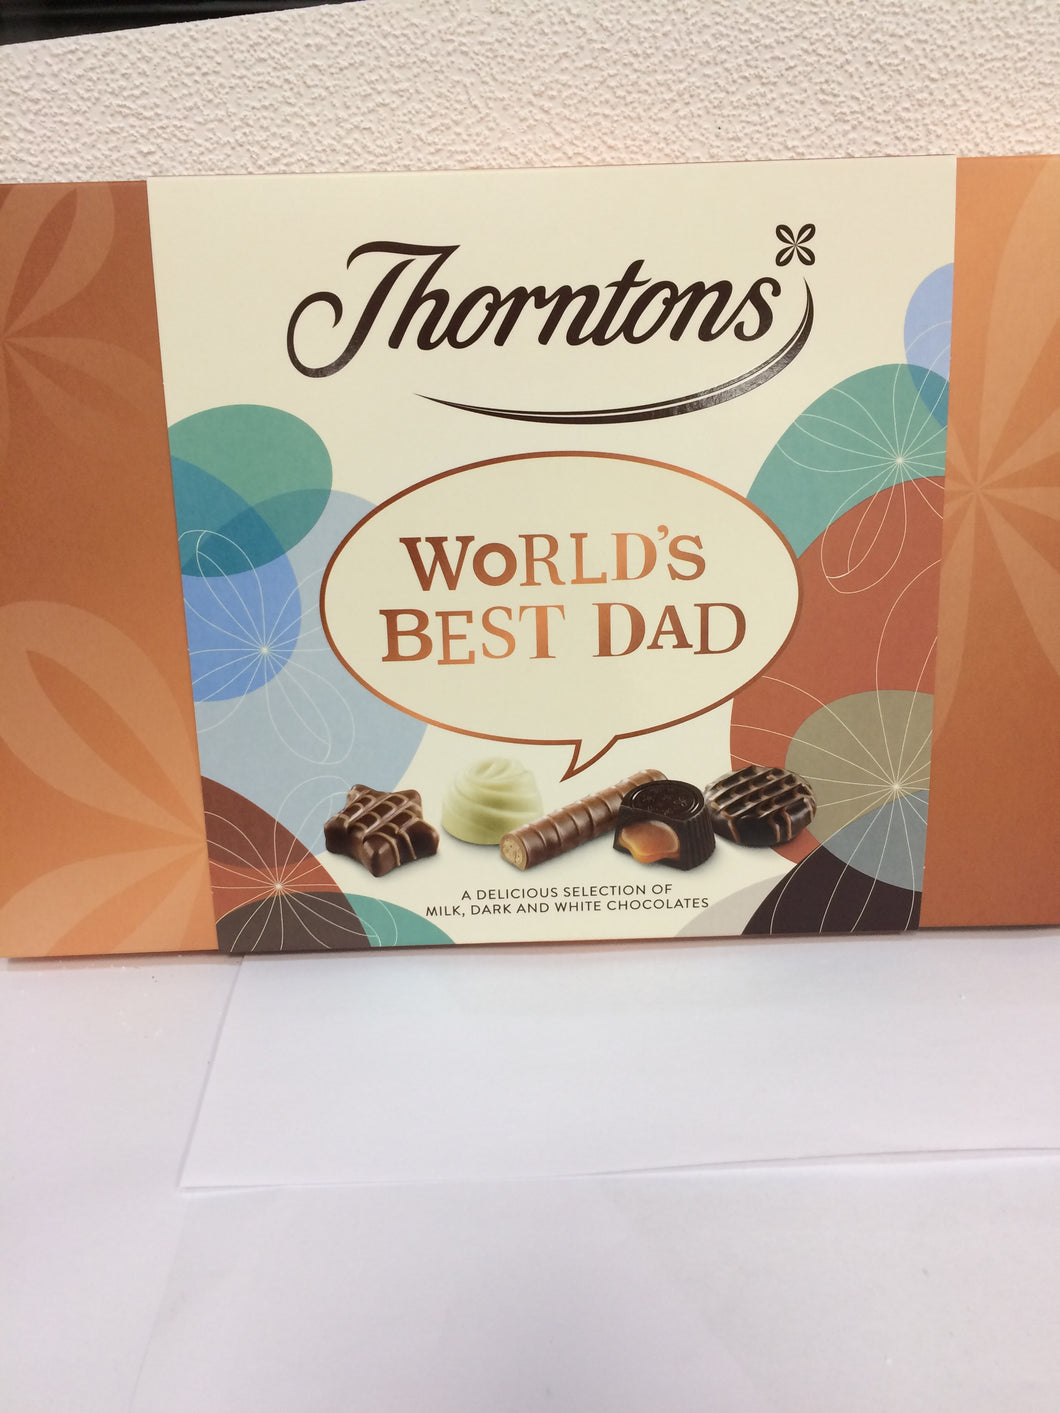 Thorntons Chocolate Selection 189g - Worlds Best Dad